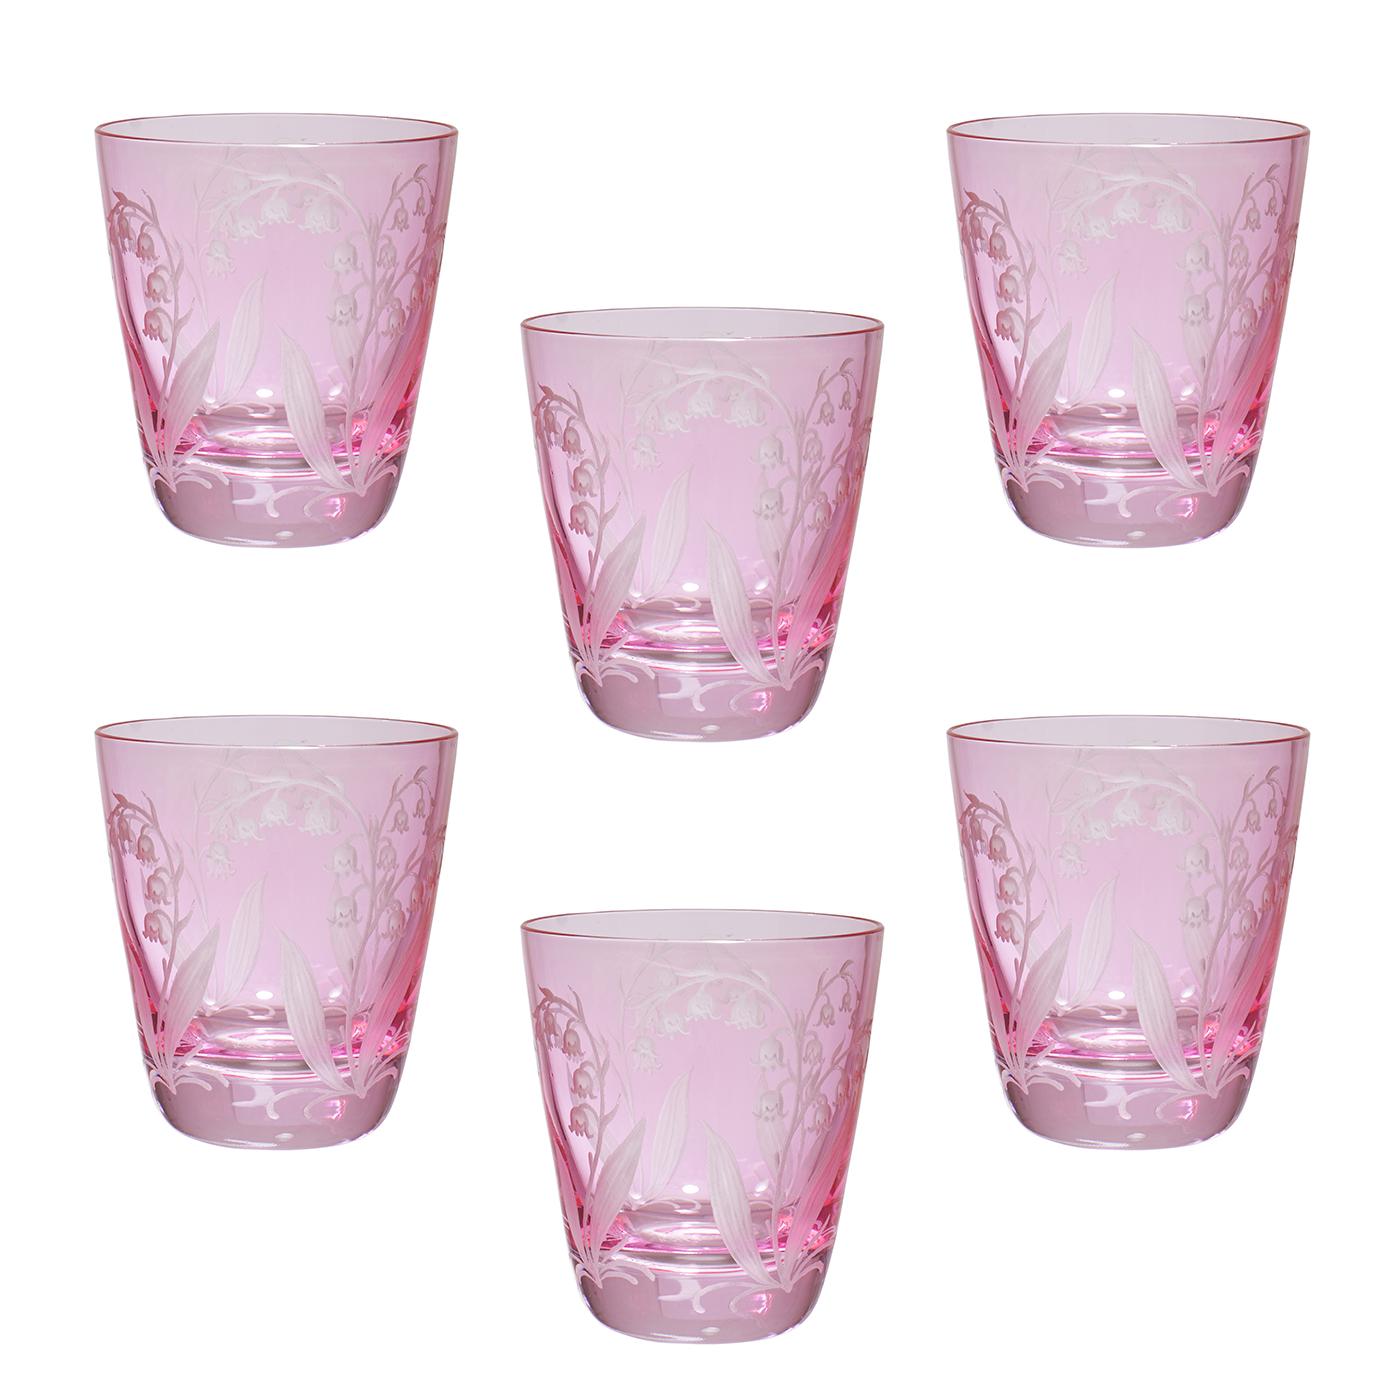 Set of 6 hand blown tumblers in pink crystal with a country style lily of the valley decor all around. A matching carafe can be ordered in addition. Can be ordered in different colors like blue, pink and green. Not recommend for dishwasher